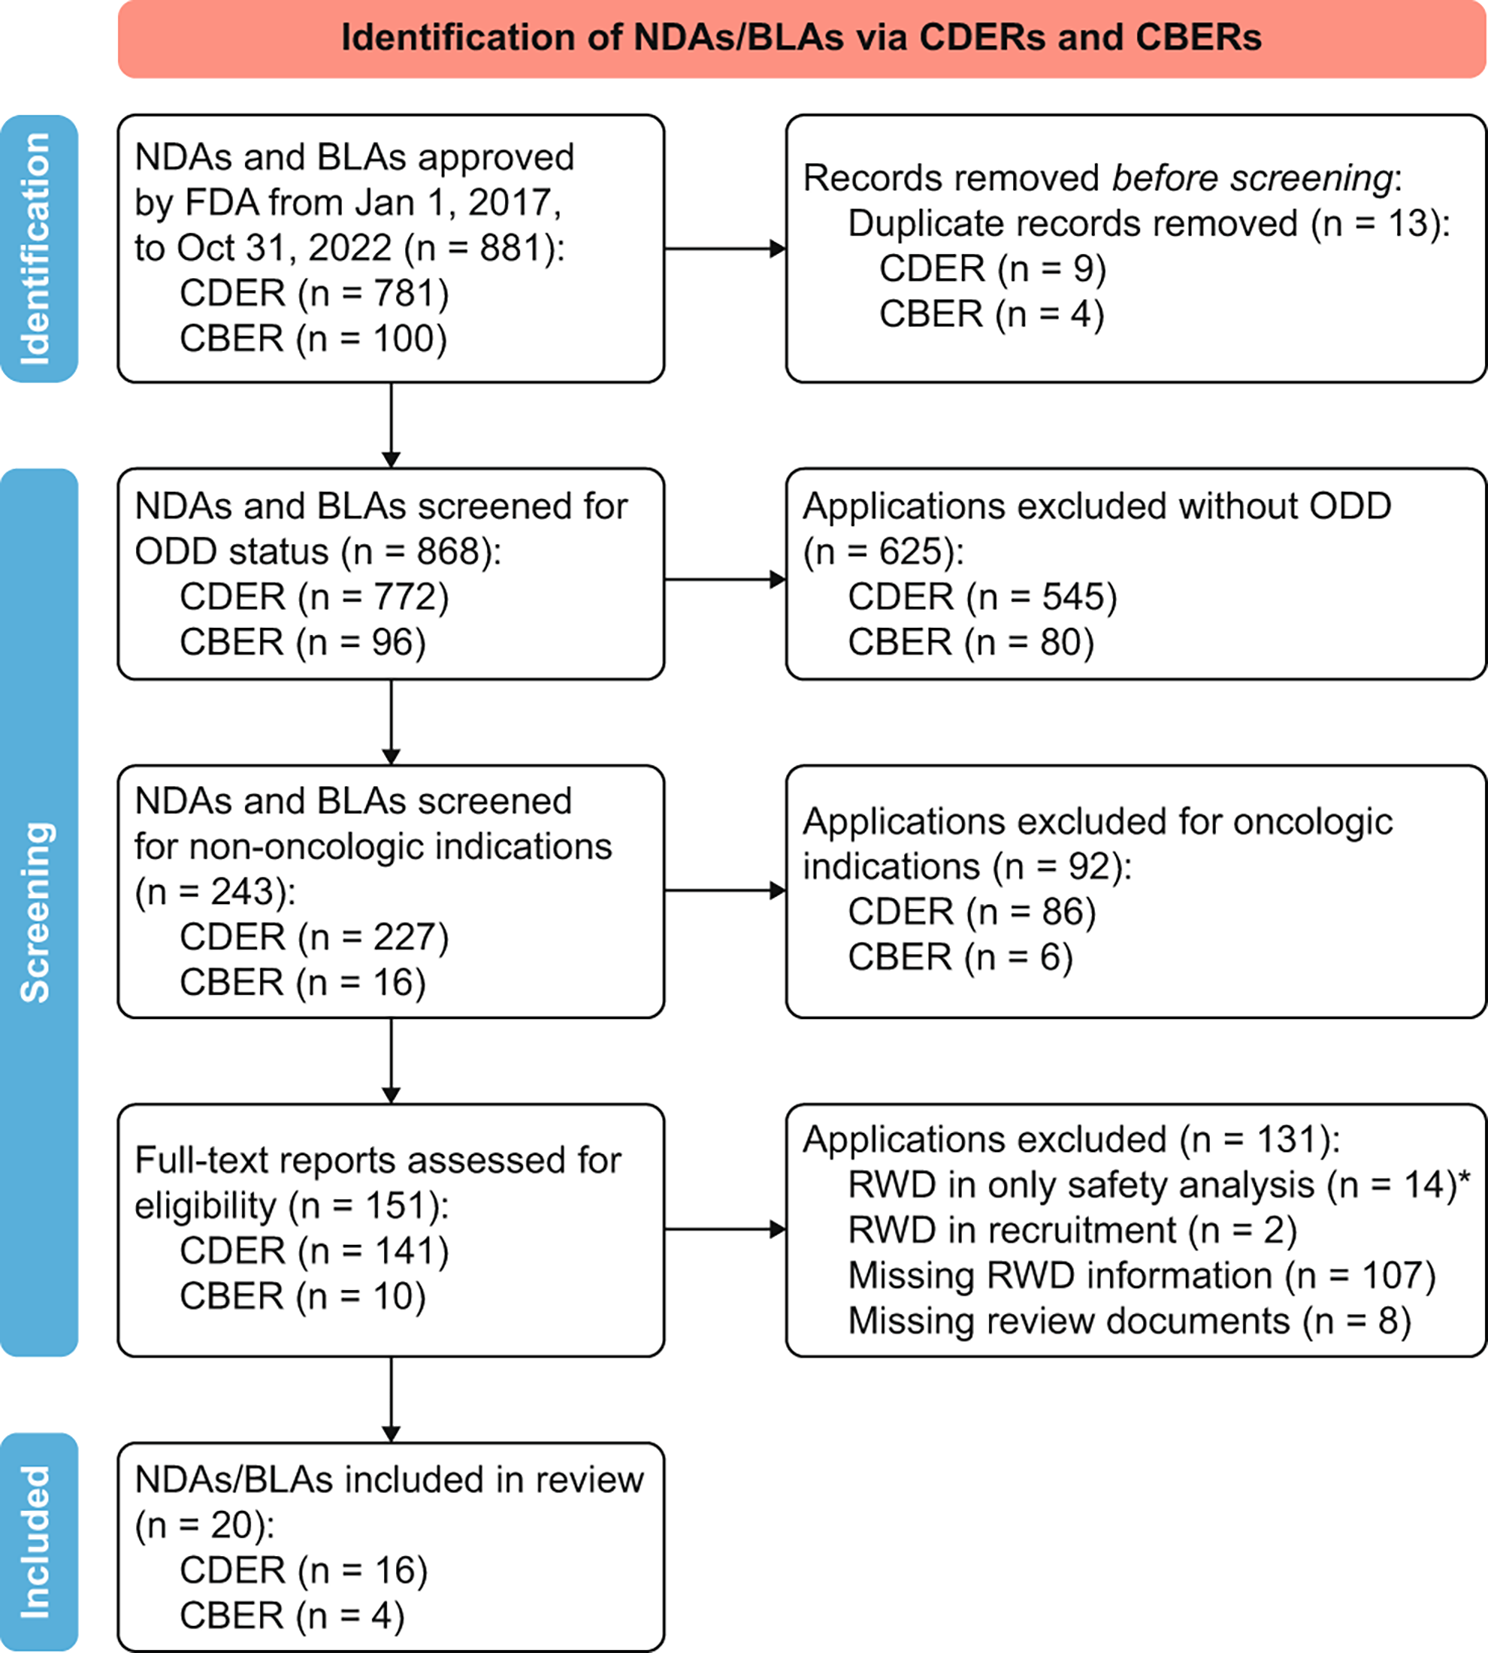 A systematic review of real-world evidence (RWE) supportive of new drug and biologic license application approvals in rare diseases